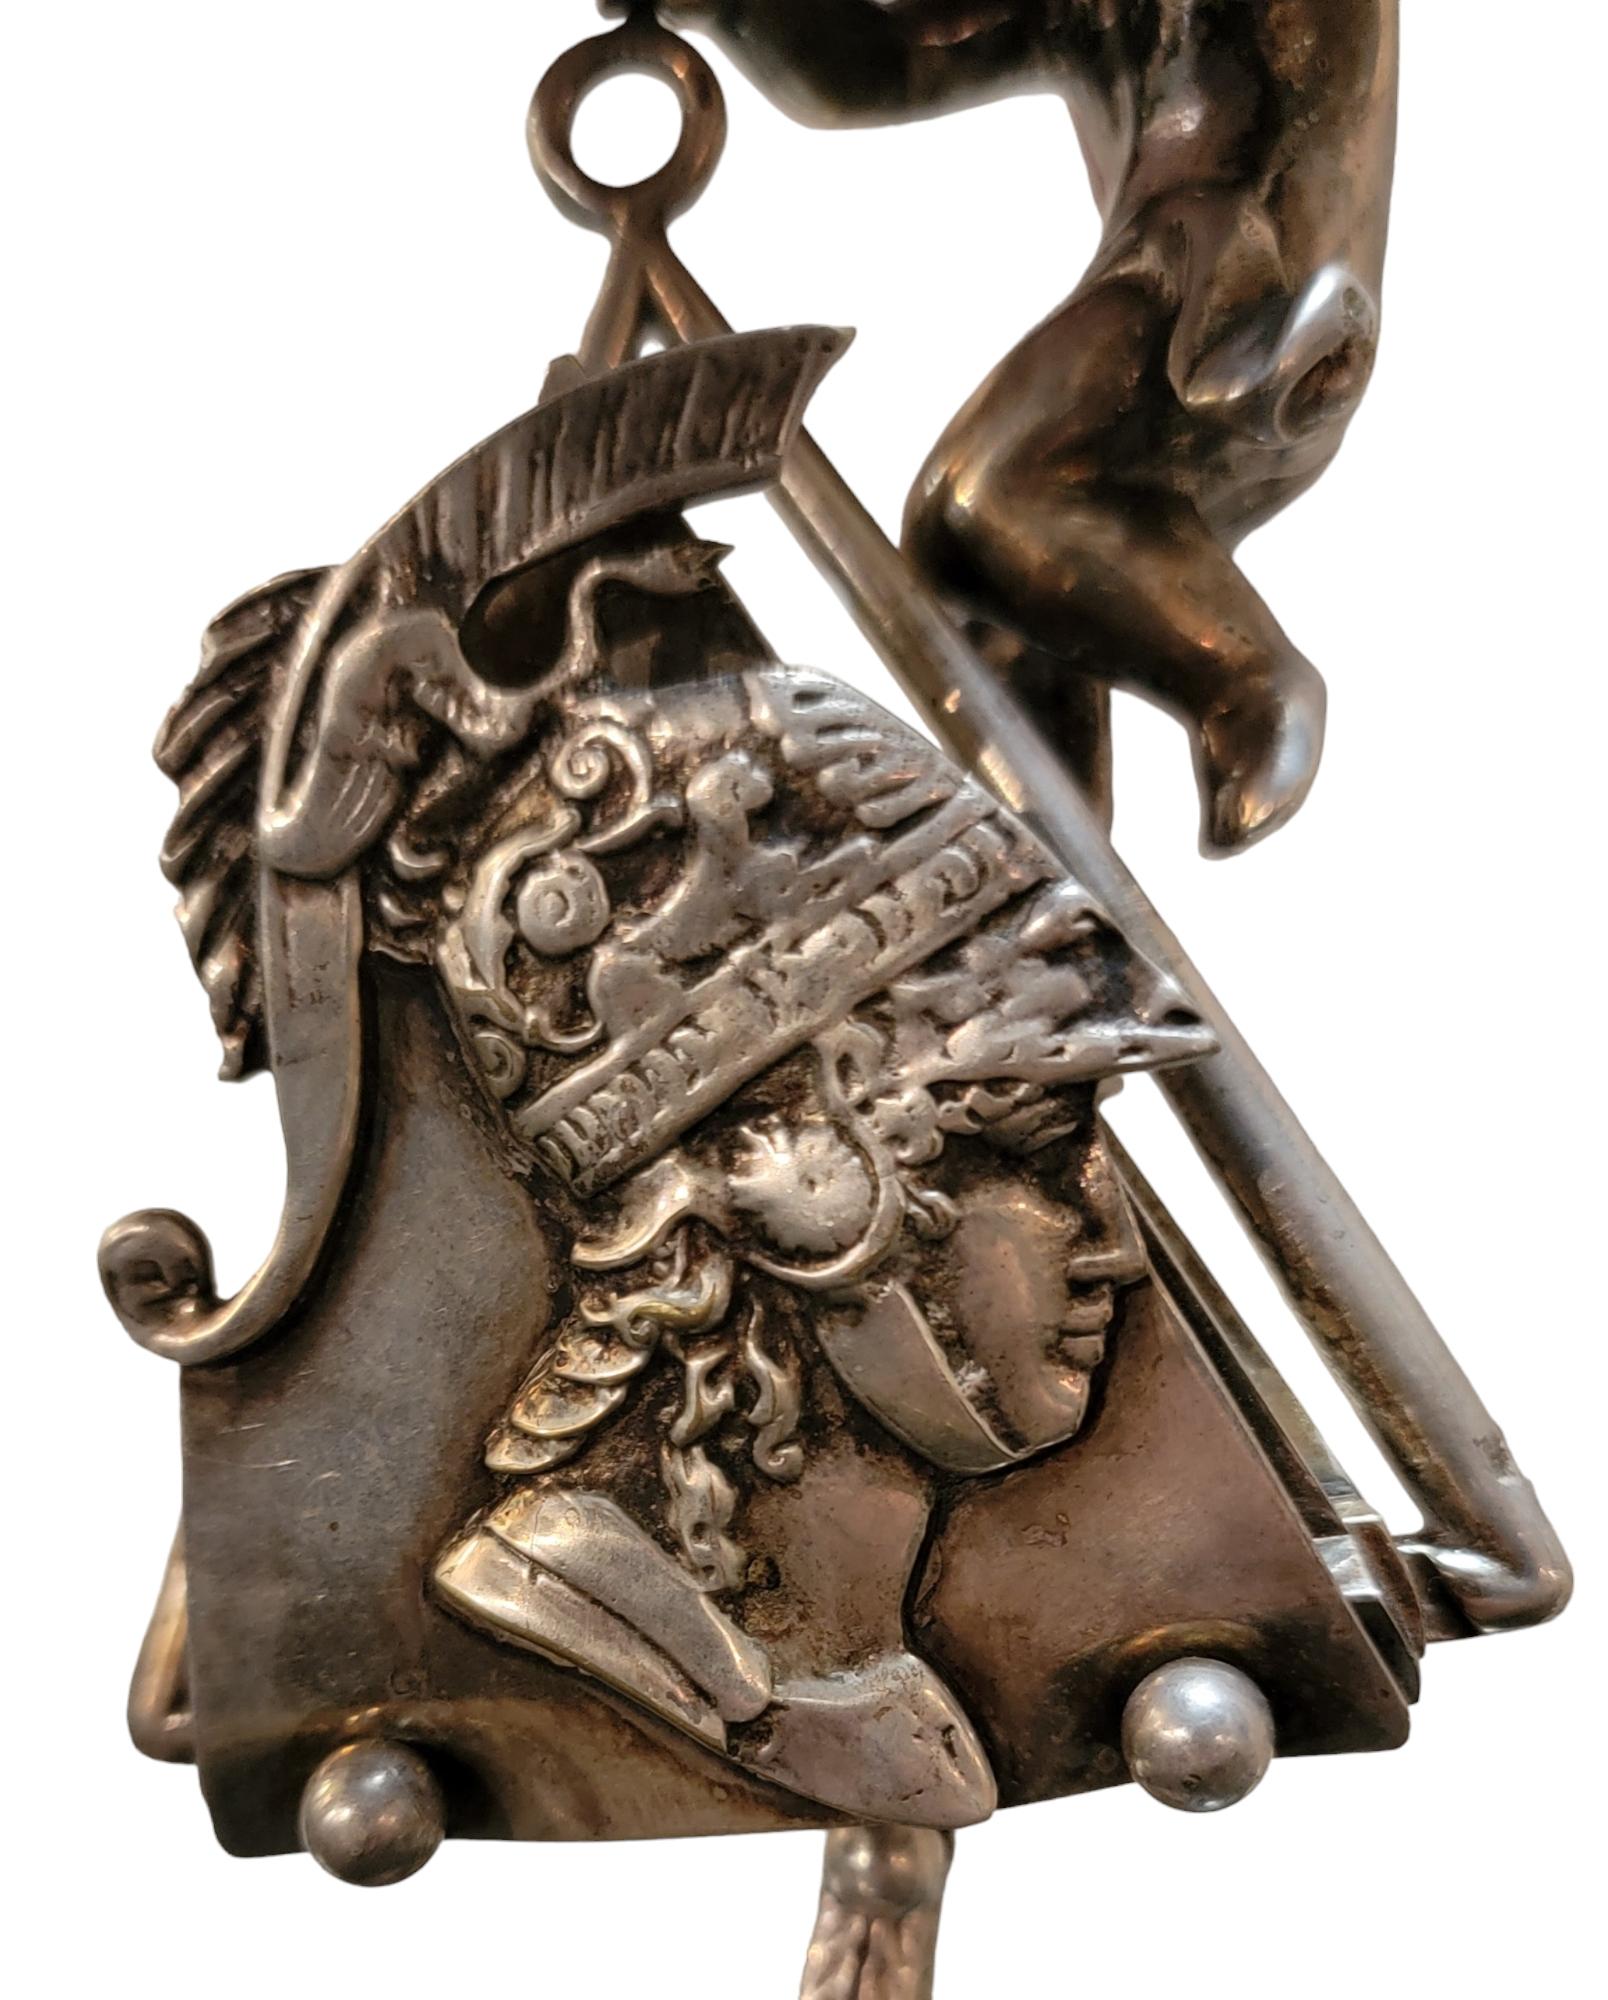 Antique Silver Letter Envelope Holder with baby figuring overlooking your mail.This wonderful Stand has a roman catolic soldiers head and halmet on the front. The base has an ornate design that blends into the stem. Meausres approx - 9.75h x 3.5w x